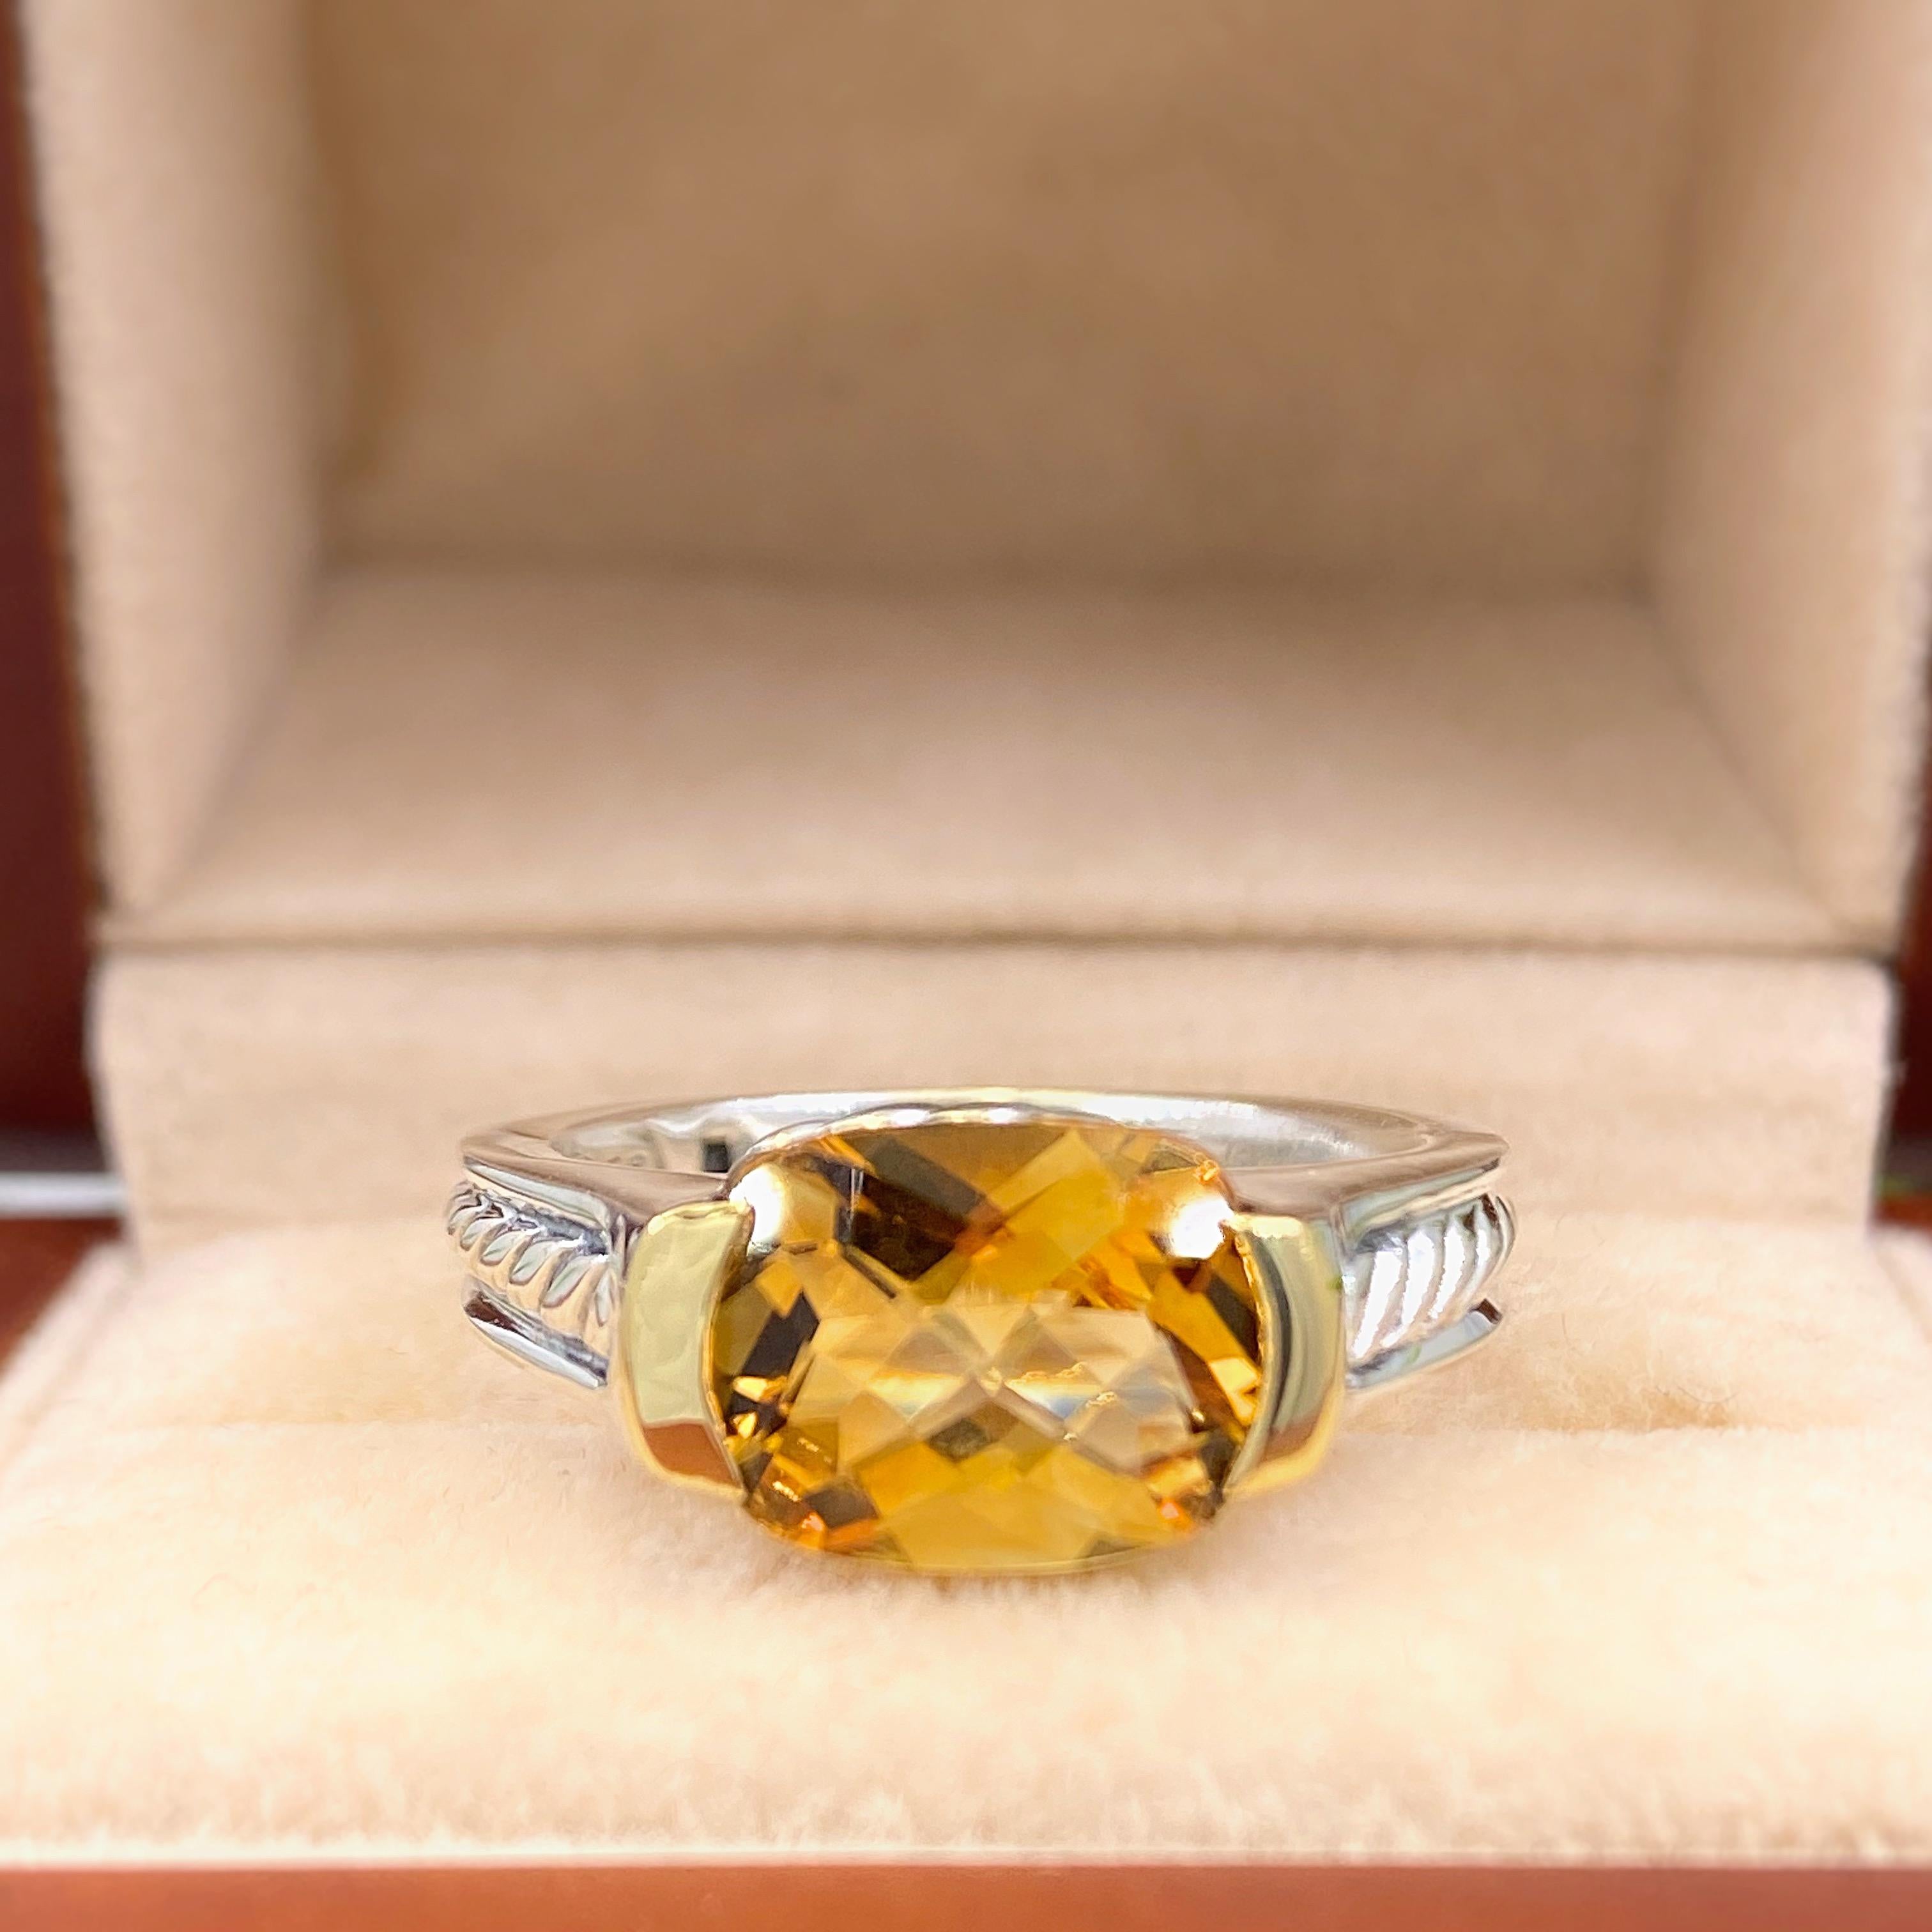 David Yurman Citrine Cable Ring
Metal:  Sterling Silver & 18kt Yellow Gold
Size:  7.25 sizable
Gemstone:  8 MM
Hallmark:  ©D.Y.825 750
Includes:  Elegant Ring Box
Retail:  $1,150

Sku#11980TCF011018